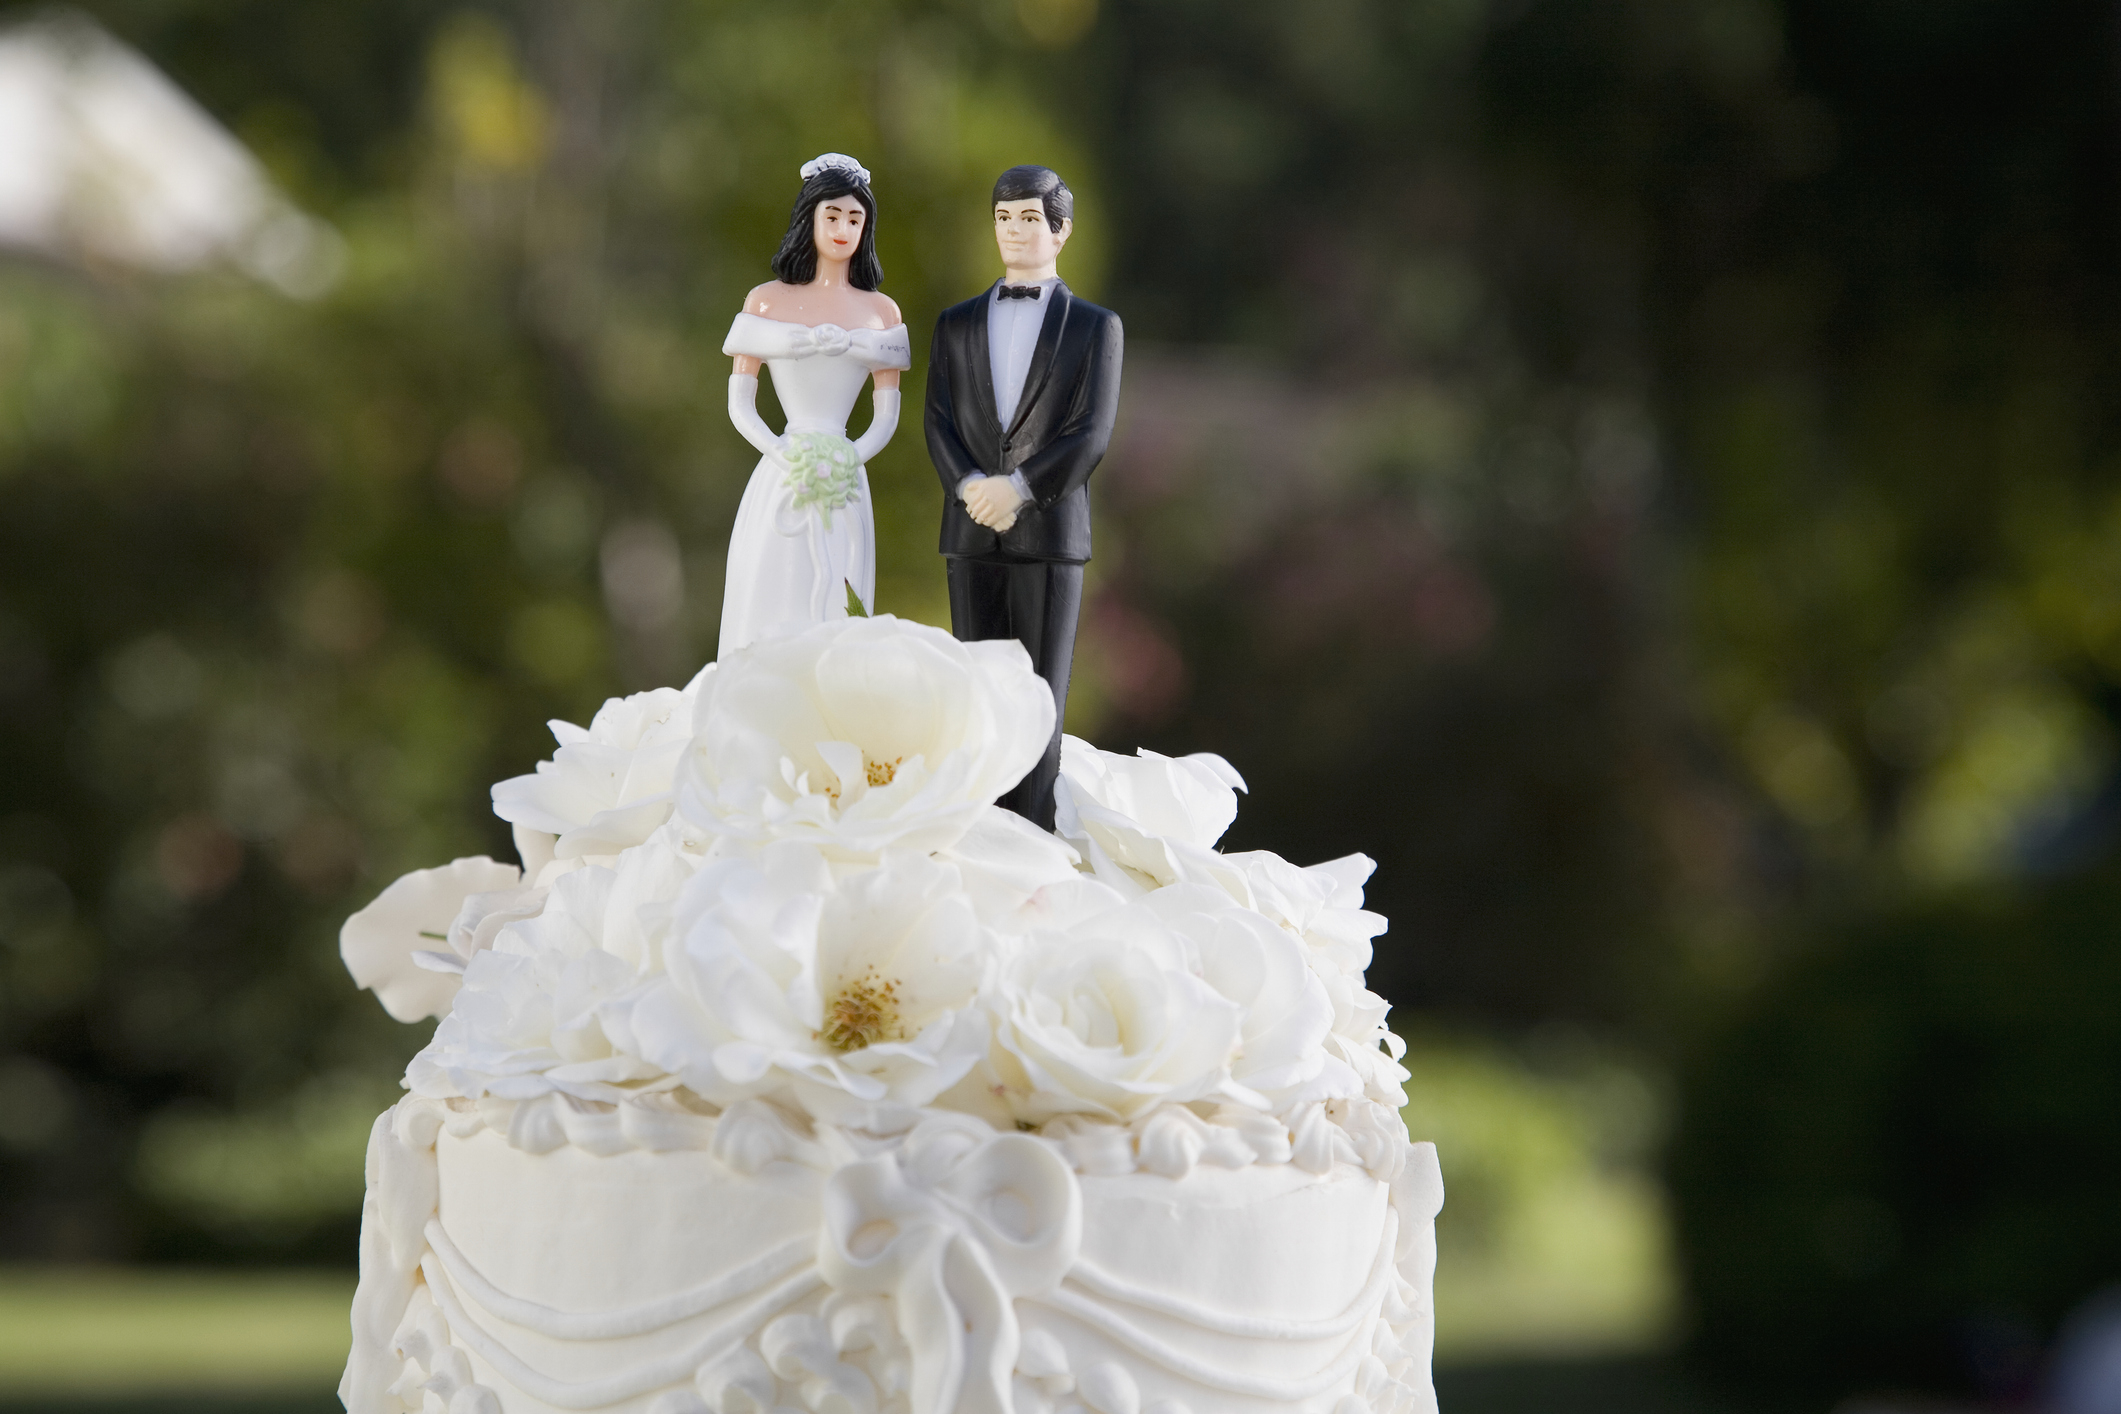 Bride and groom figurines atop a wedding cake with intricate icing details